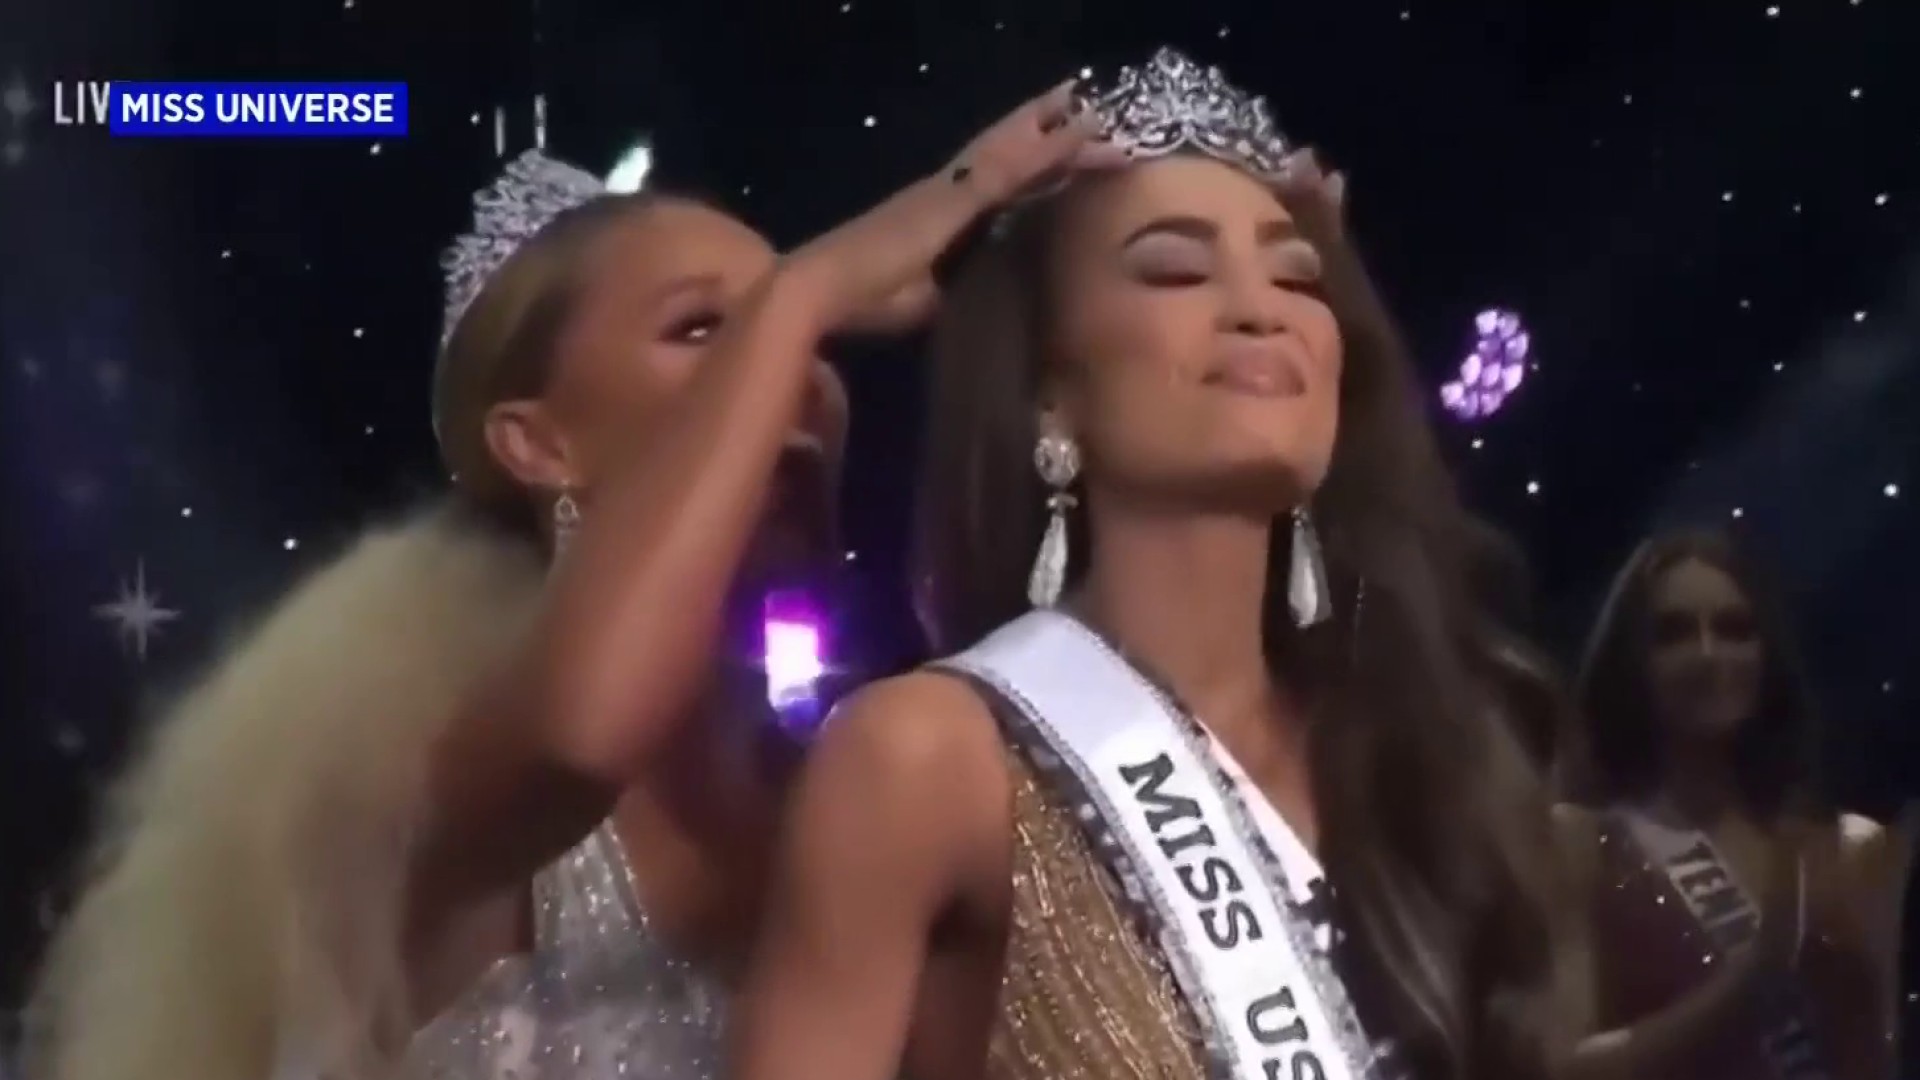 Miss usa winner from friendswood dismisses allegations that pageant was rigged in her favor